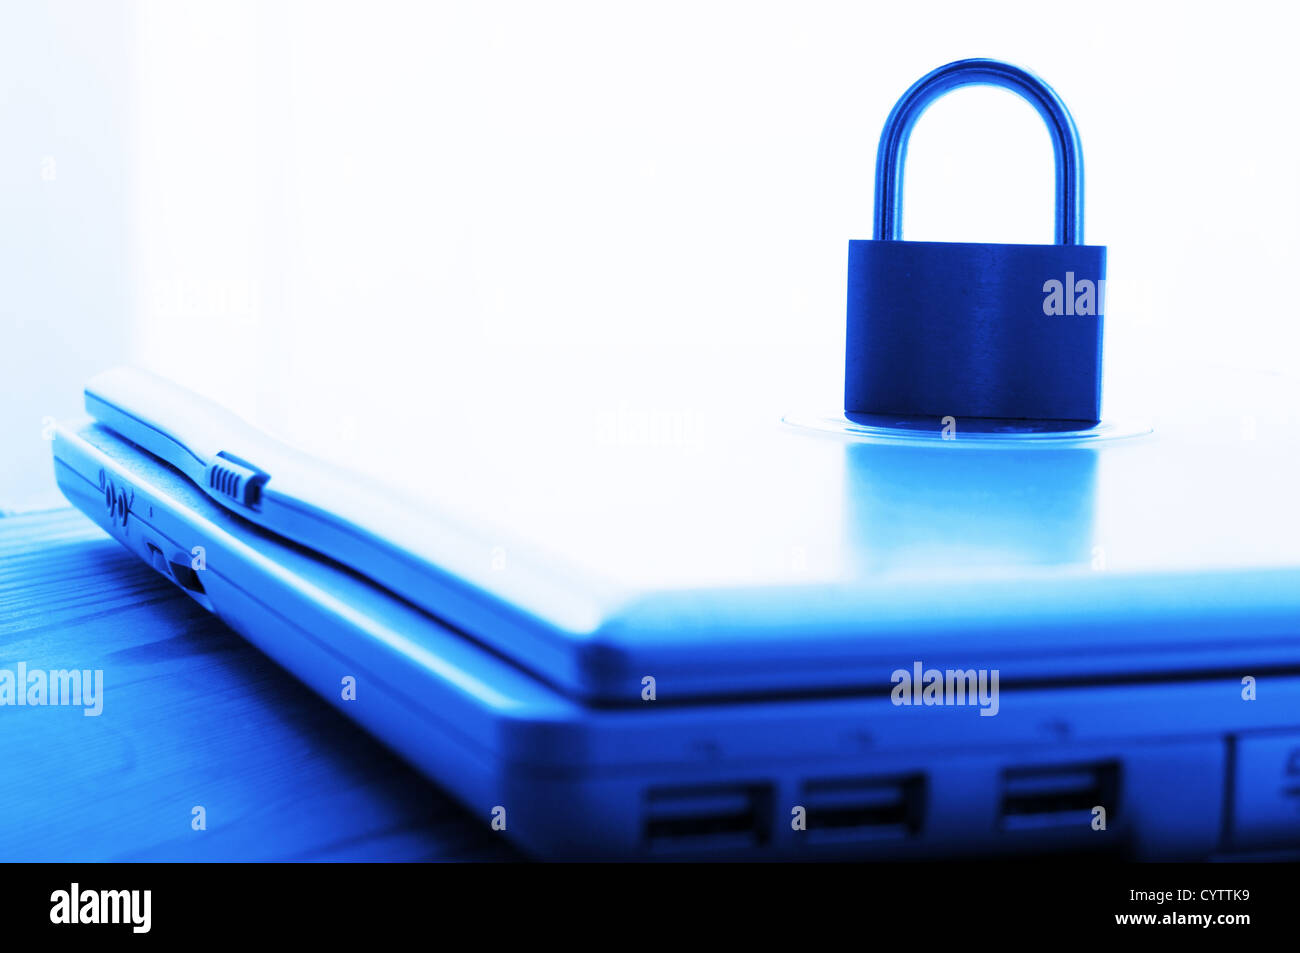 notebook and padlock showing internet or data security concept in blue Stock Photo